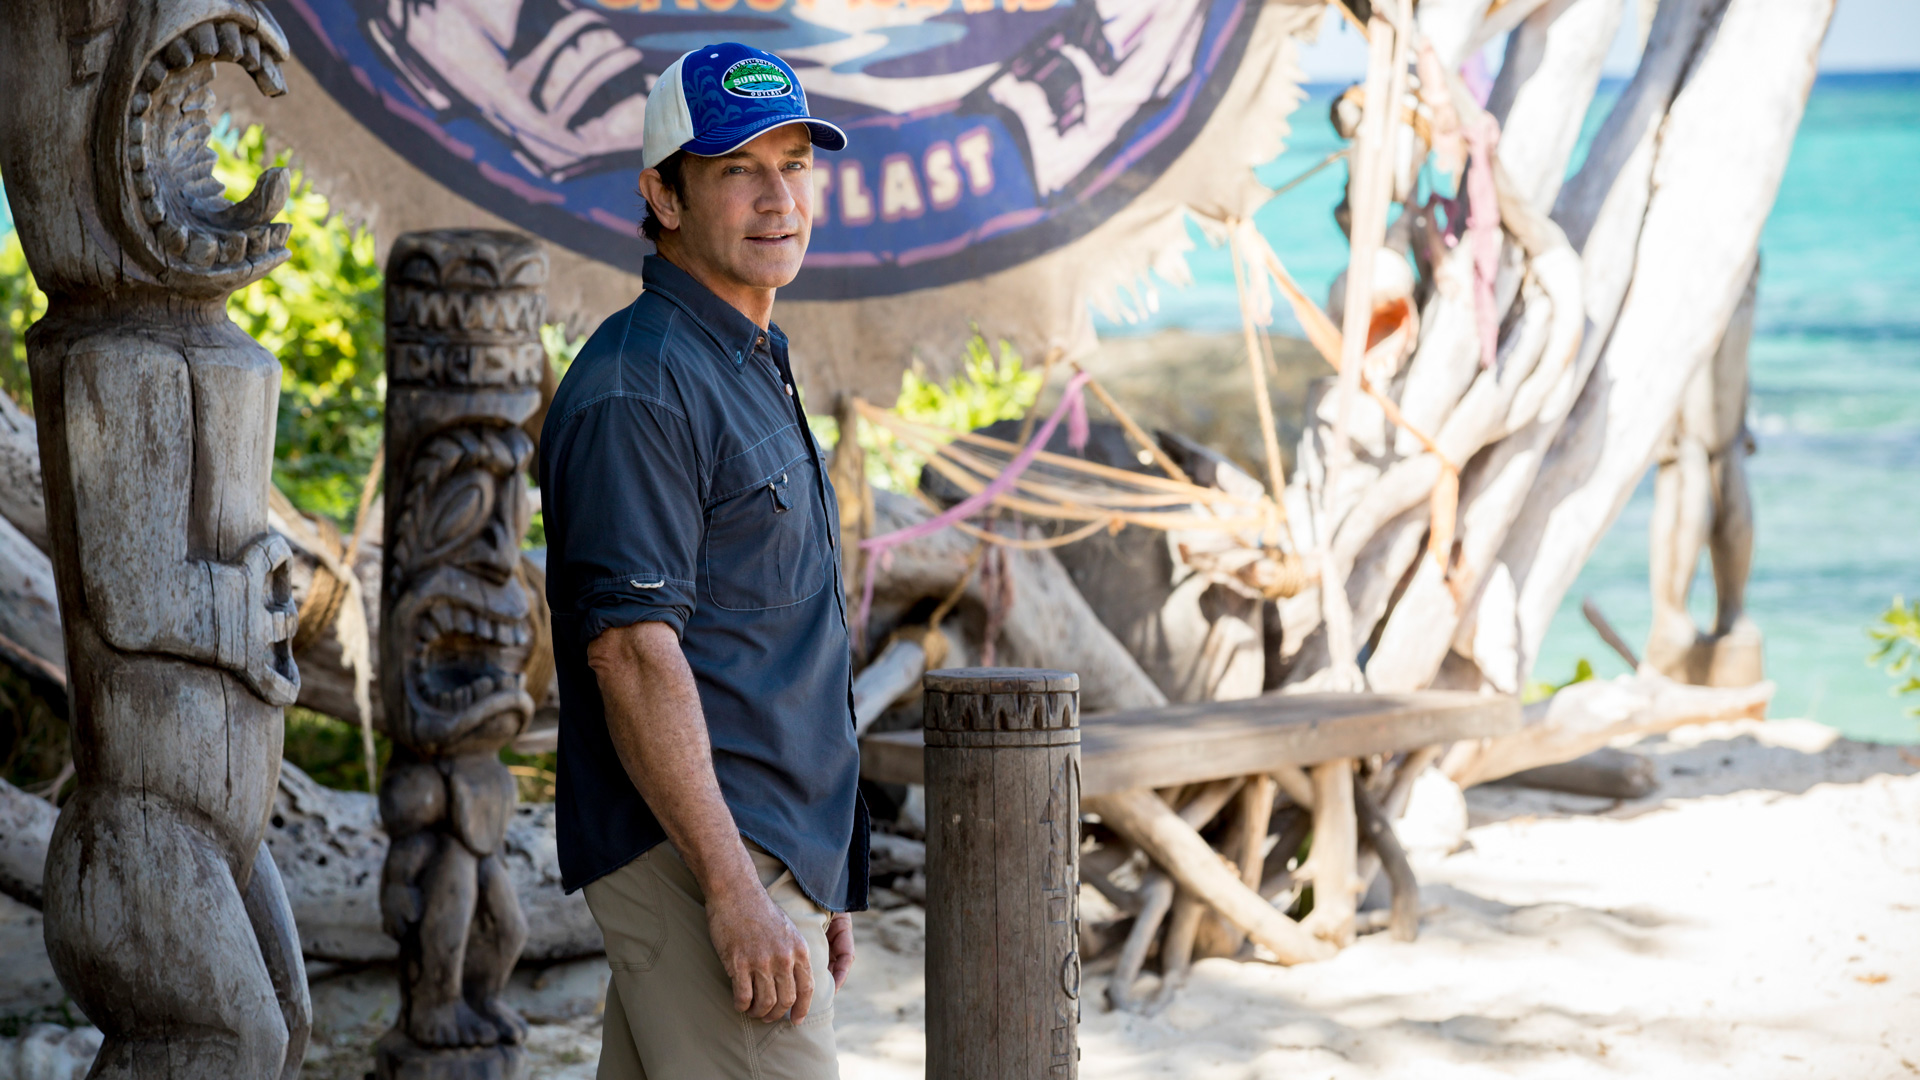 And of course, Jeff Probst returns for his 36th season as the show's host.